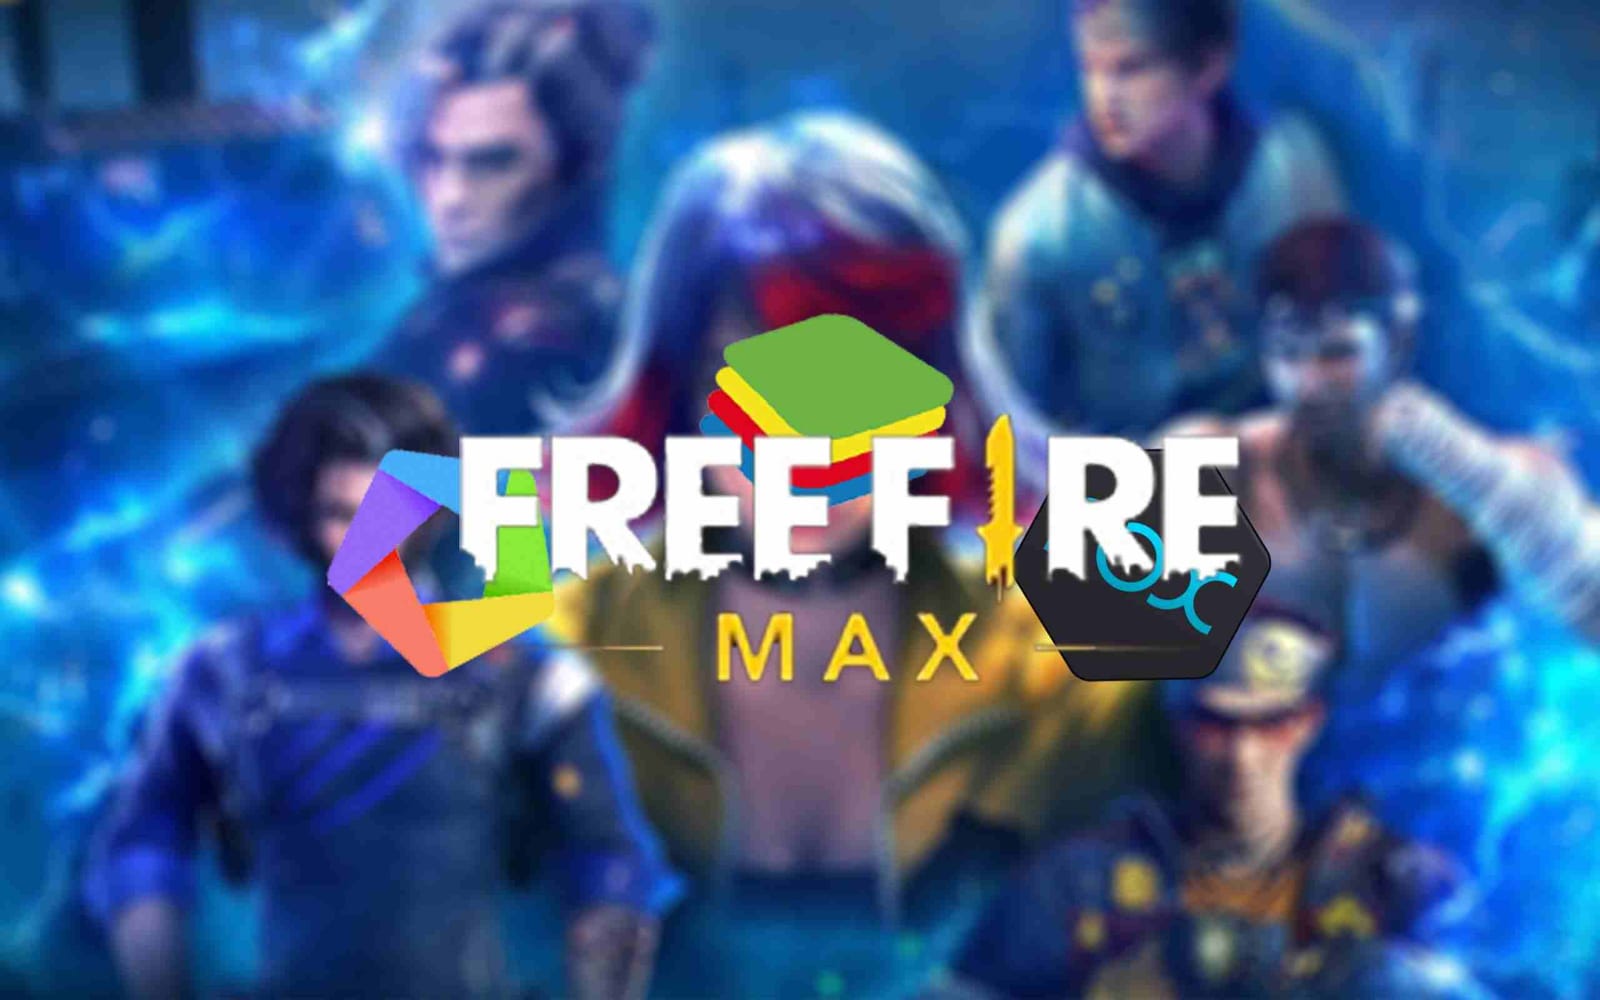 free fire max pc download, free fire max for pc, free fire max for pc download, how to download free fire max, install free fire max on pc